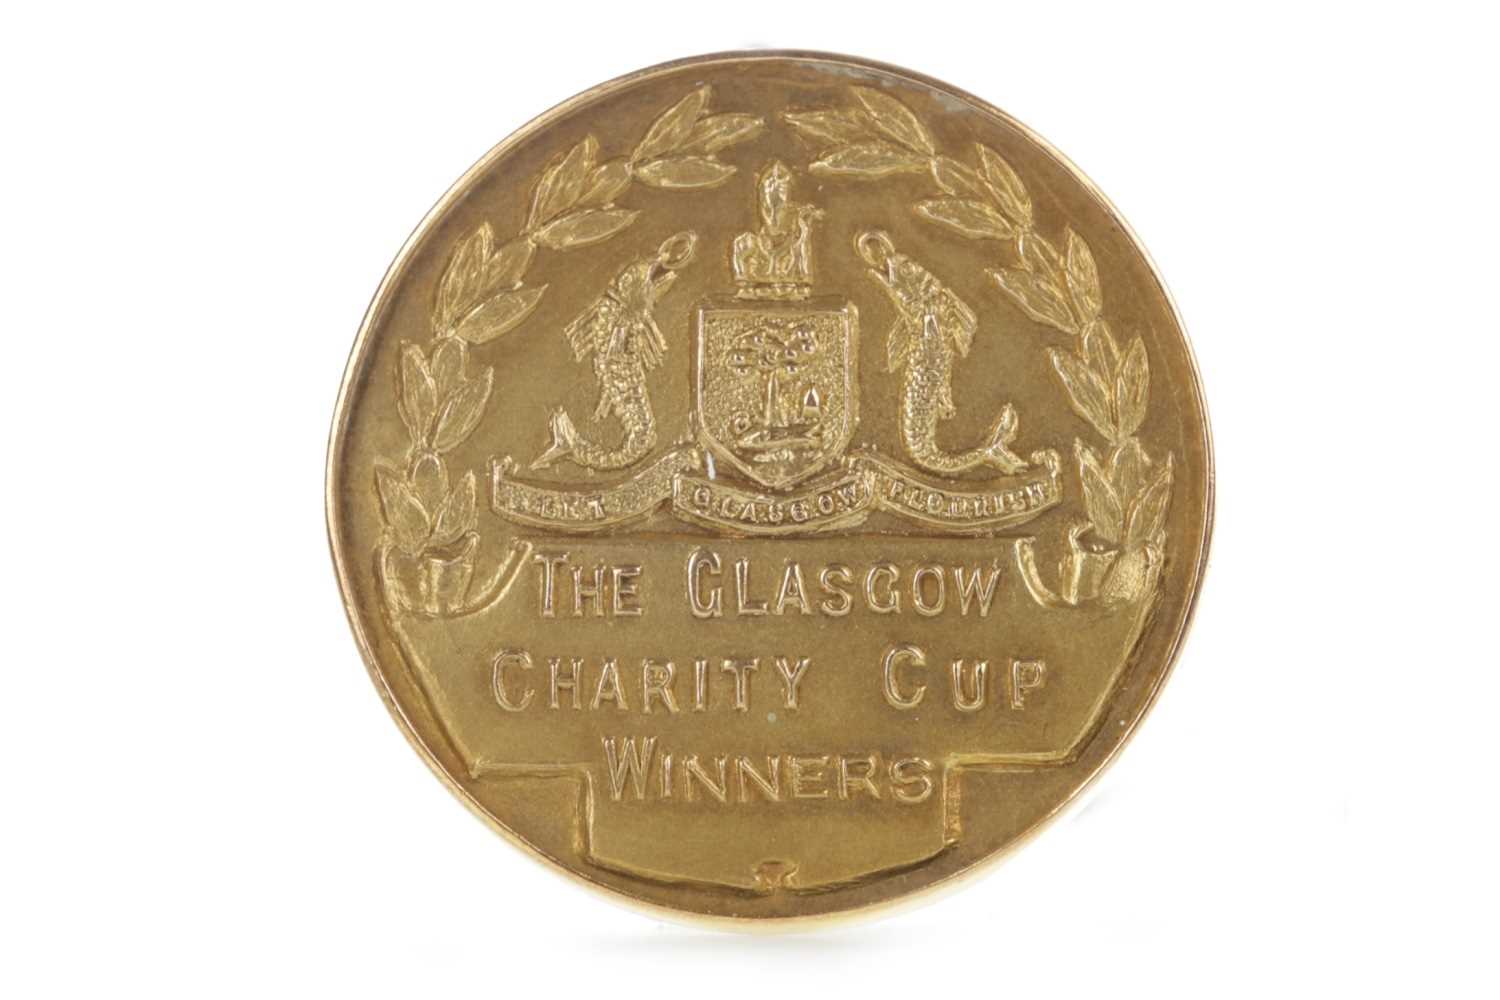 Lot 1934 - BOBBY SHEARER 'CAPTAIN CUTLASS' OF RANGERS F.C. - HIS GLASGOW CHARITY CUP WINNERS GOLD MEDAL 1957